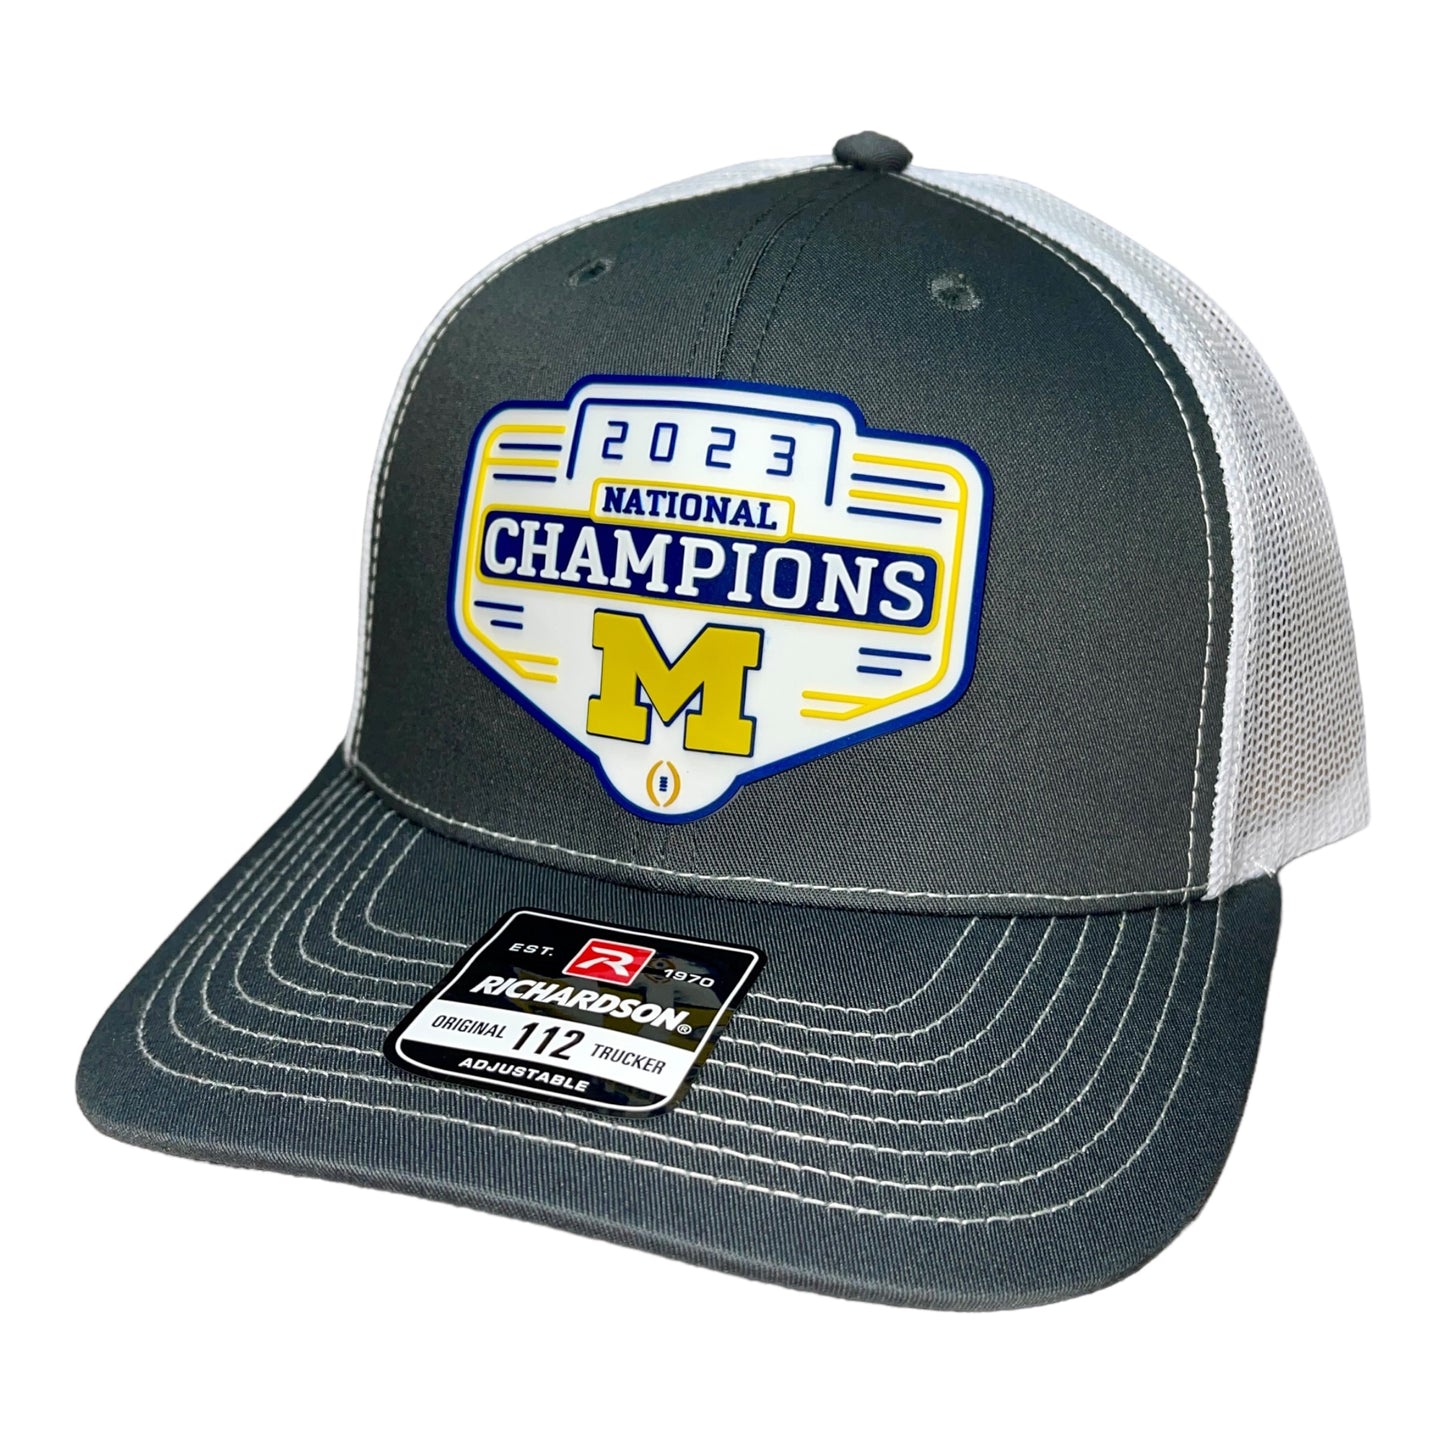 Michigan Wolverines 2023 National Champions 3D Snapback Trucker Hat- Charcoal/ White